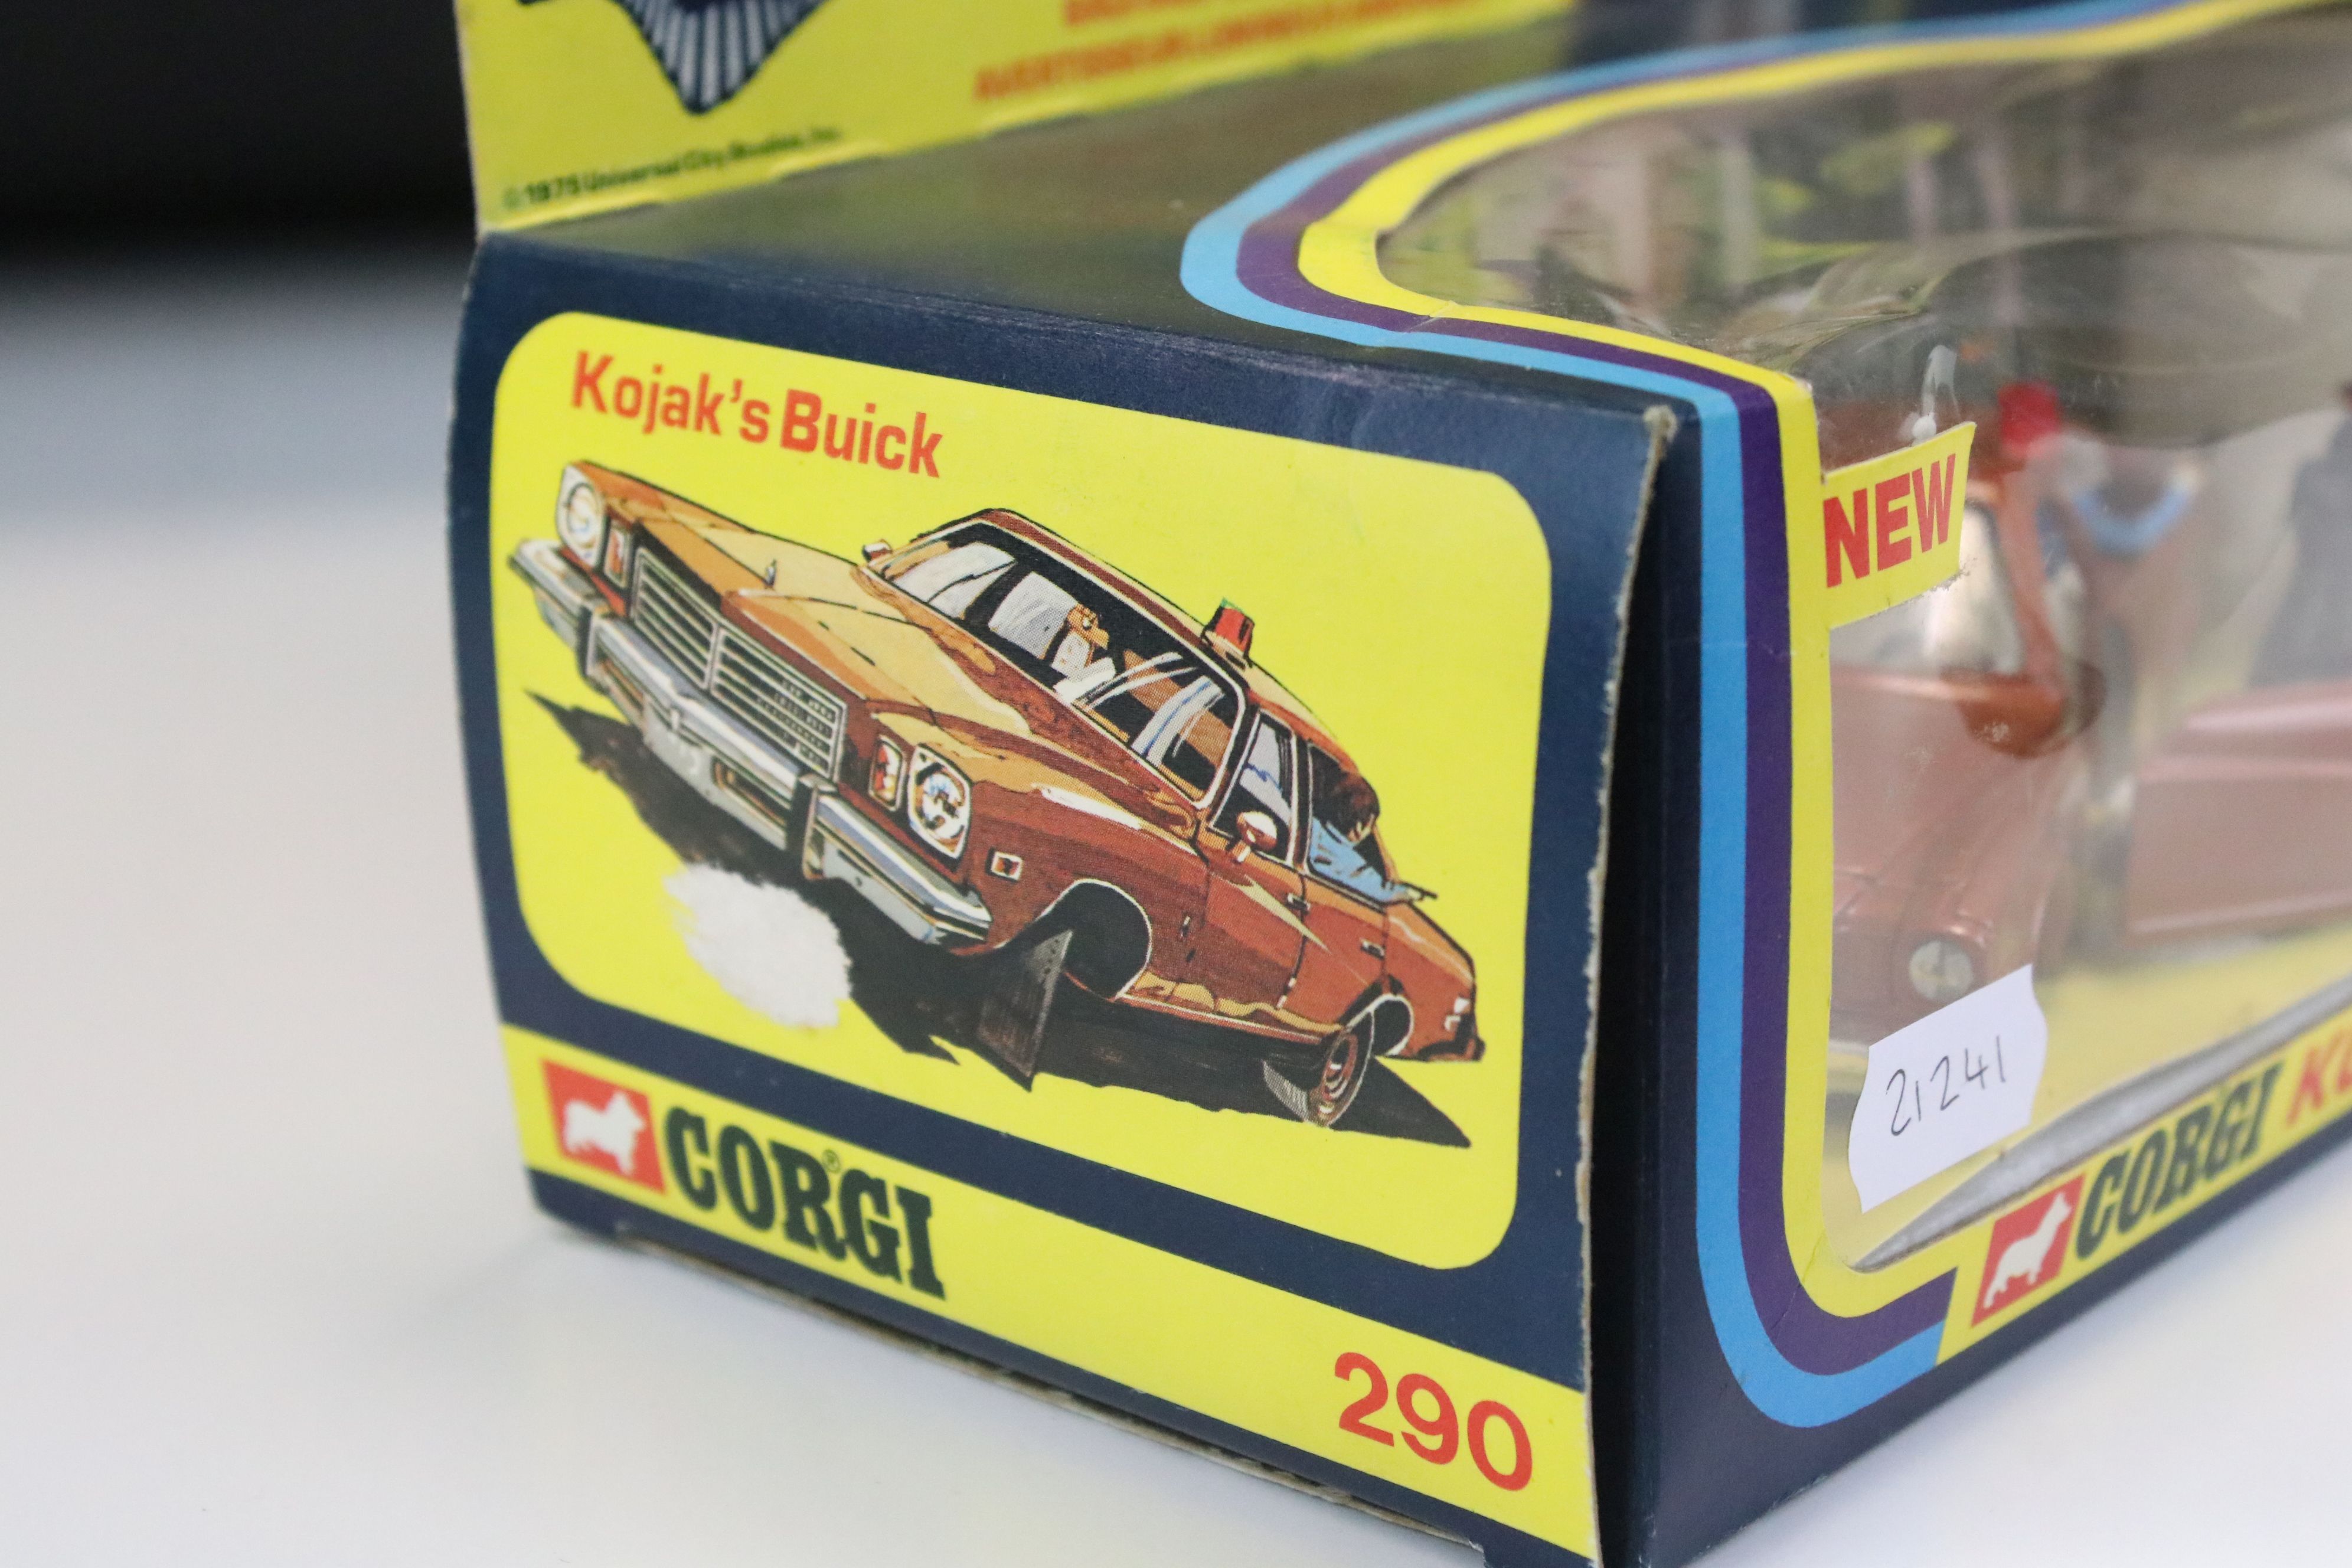 Boxed Corgi 290 Kojak's Buick diecast model complete with figure, diecast ex, box vg with small part - Image 10 of 10